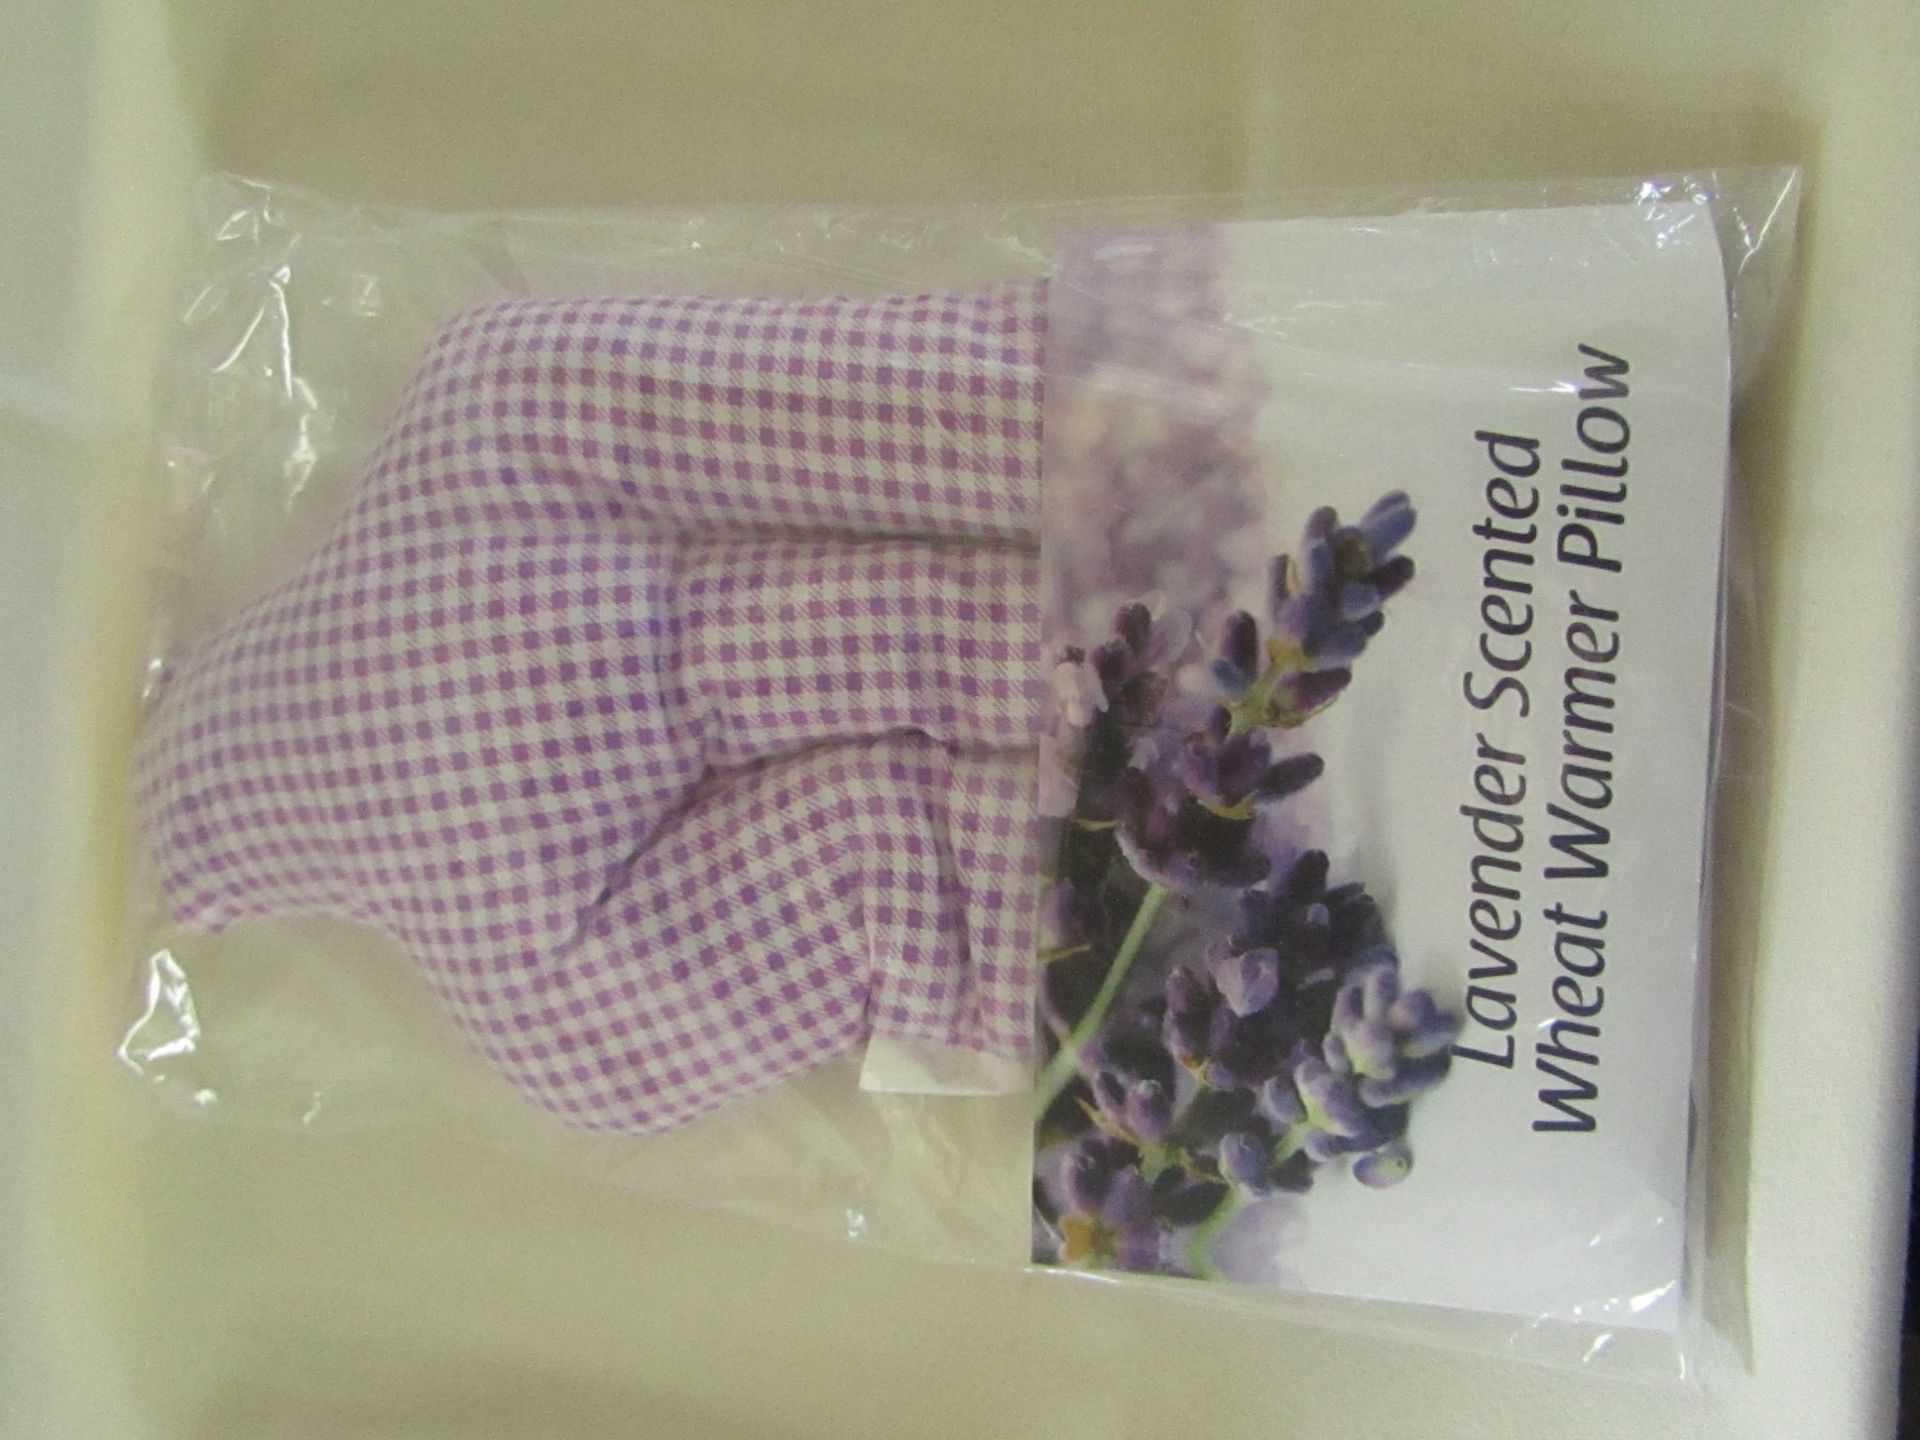 3x Lavendar Scented Wheat Pillow Warmer - Unused & Packaged.